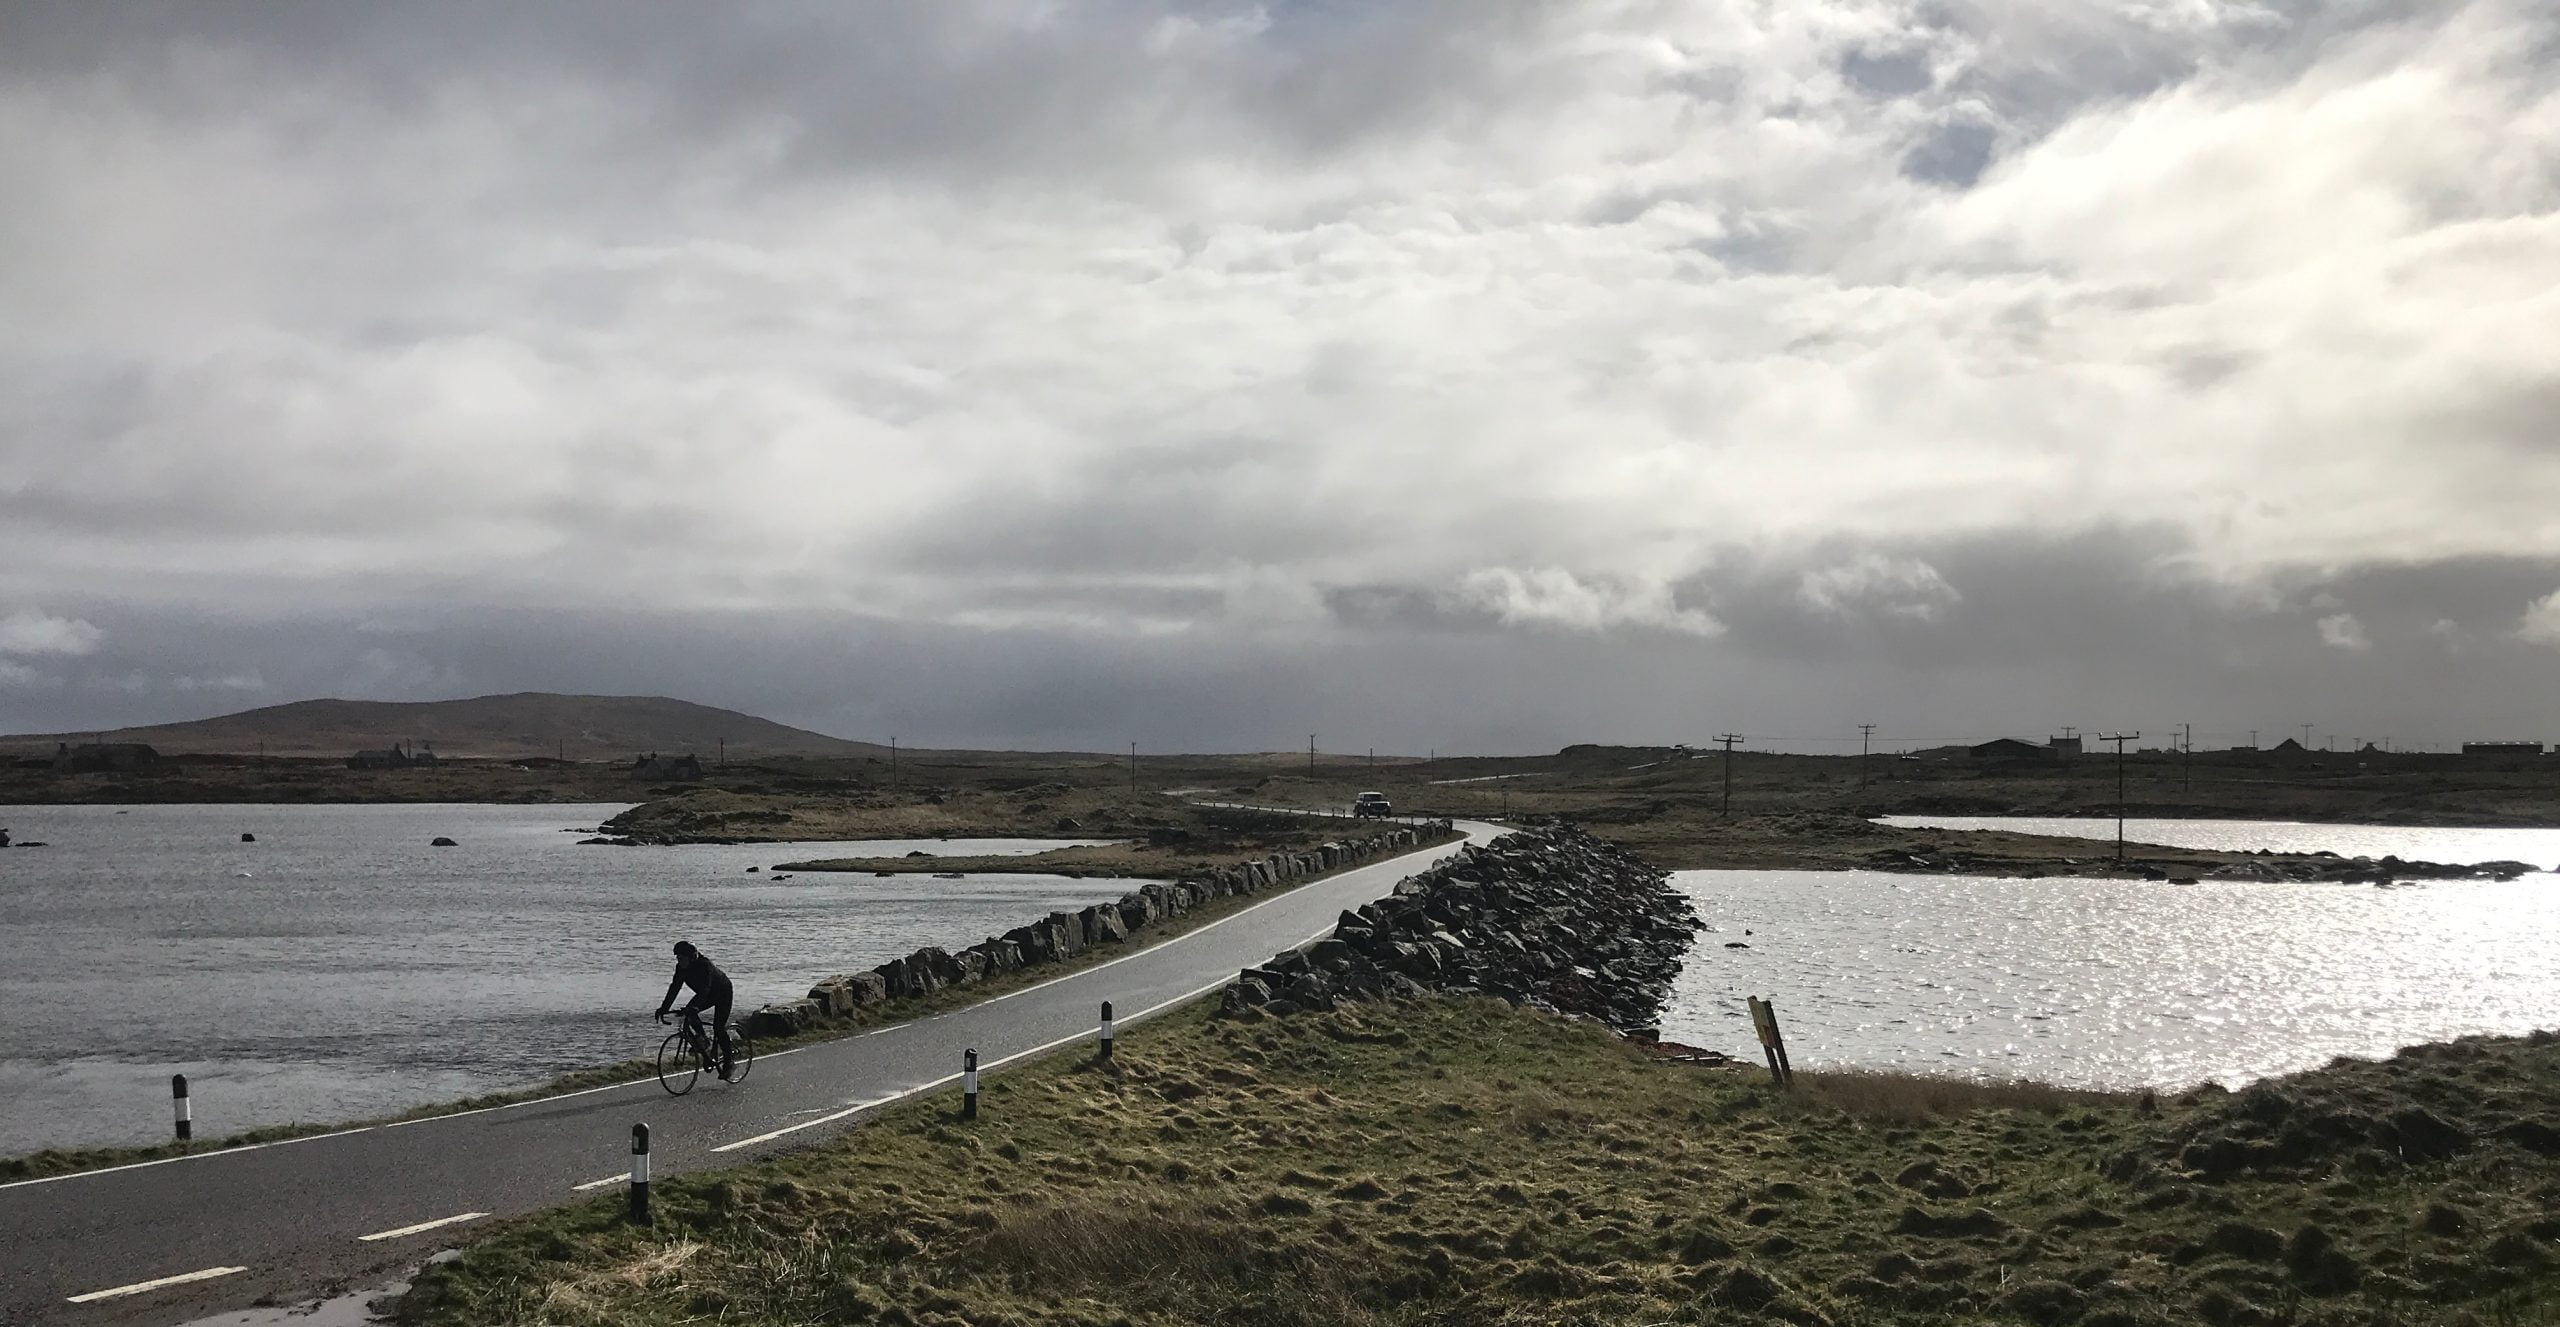 Cycling on North Uist
The Hebridean Way - Cycling from Barra to the Butt of Lewis